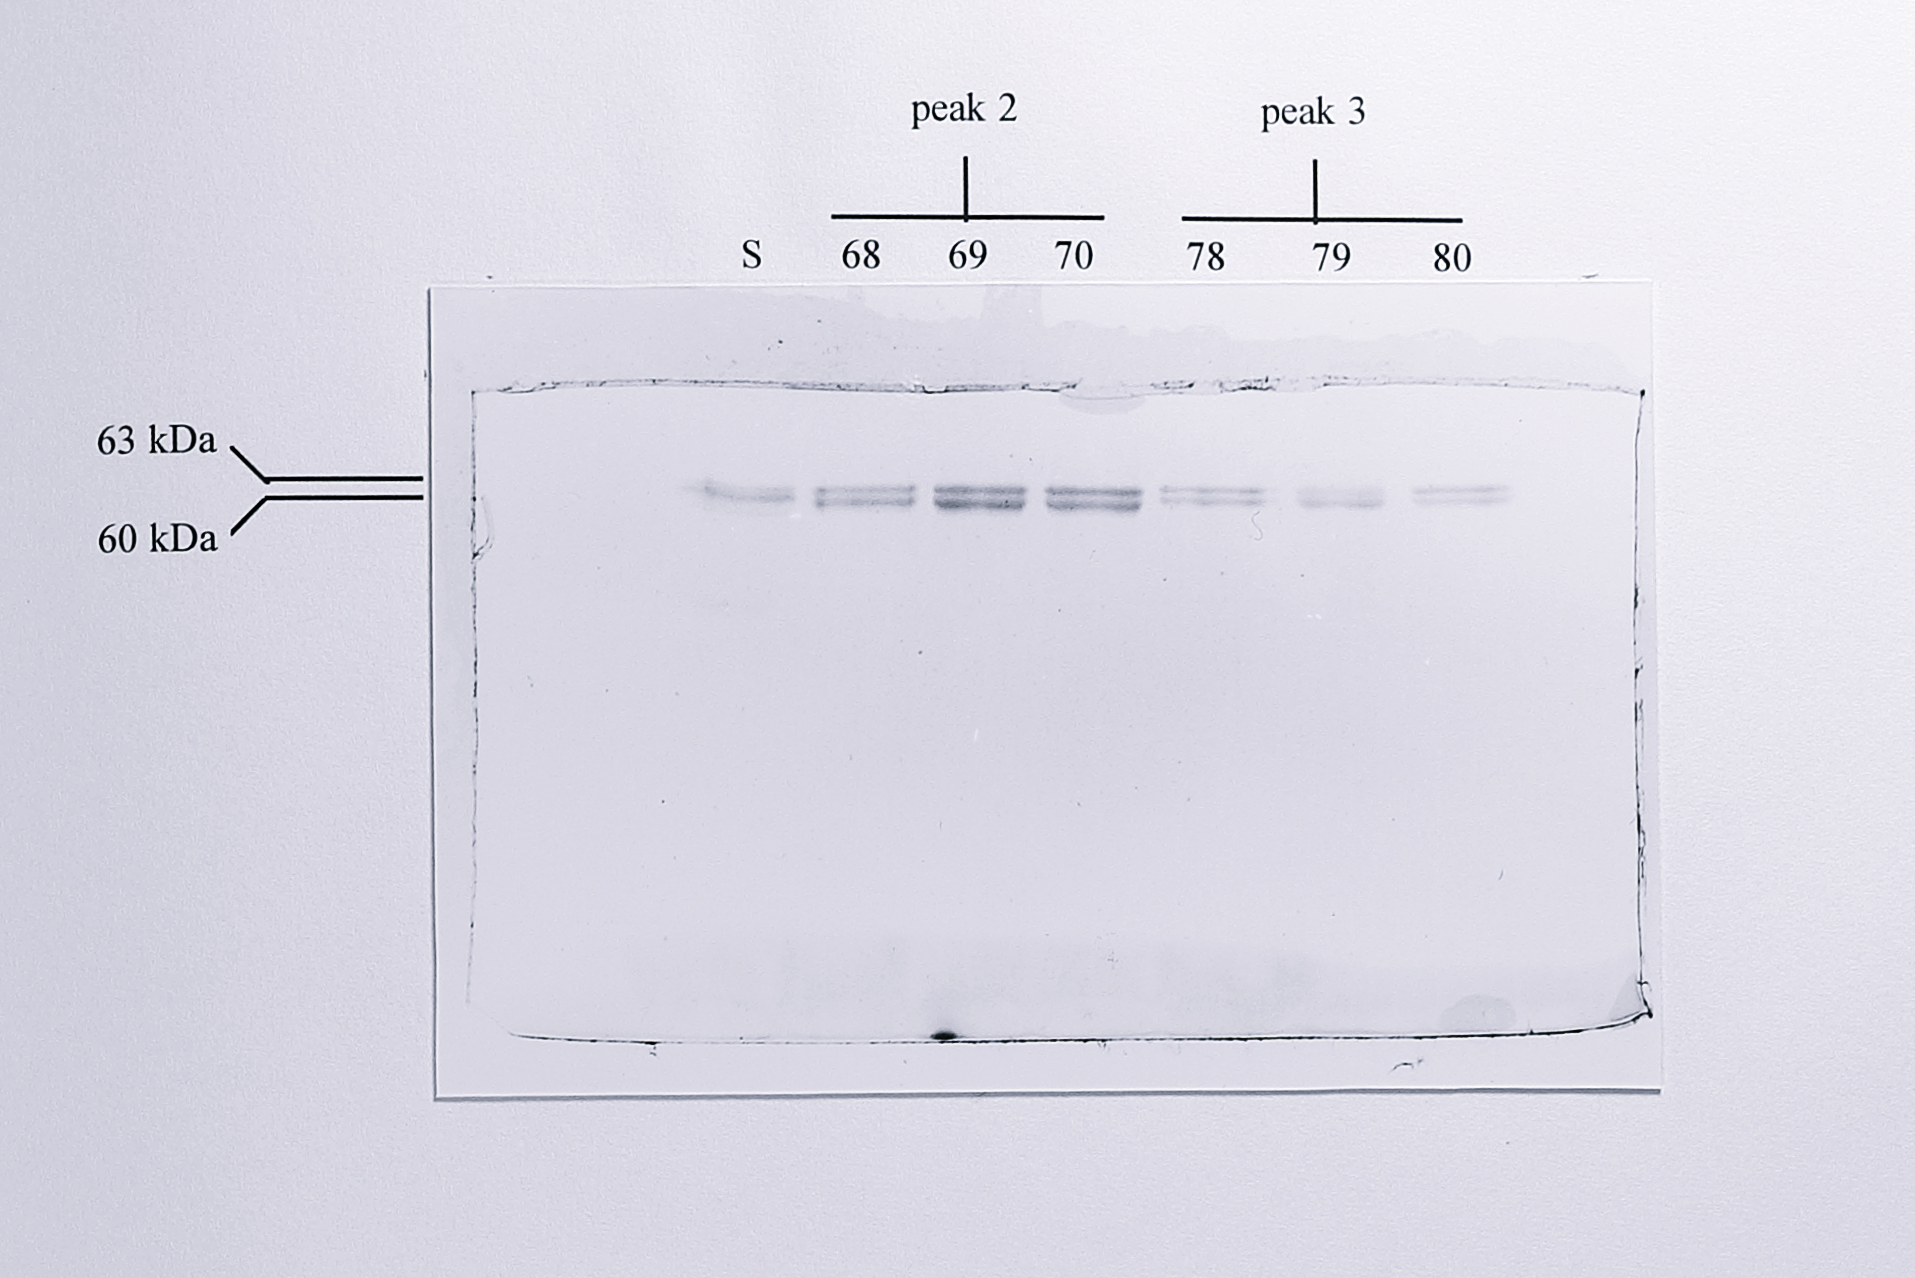 Analysis of the _c_-type cytochrome content in the elution profile of soluble extract from _Ps. aeruginosa_ [pMMBSE] following ion exchange chromatography. 15 $\mu$l of each fraction was loaded in each lane and separated by SDS-PAGE in an 8% acrylamide gel. Lanes are numbered according to the fraction loaded and the peak from which the fractions were taken is indicated. Lane S contained 100 $\mu$g of total soluble extract from _Ps. aeruginosa_ [pMMBSE] grown anaerobically and induced with 1 mM IPTG. In lane S the endogenous (60 kDa) and recombinant (63 kDa) cytochrome _cd_$_1$ are indicated.